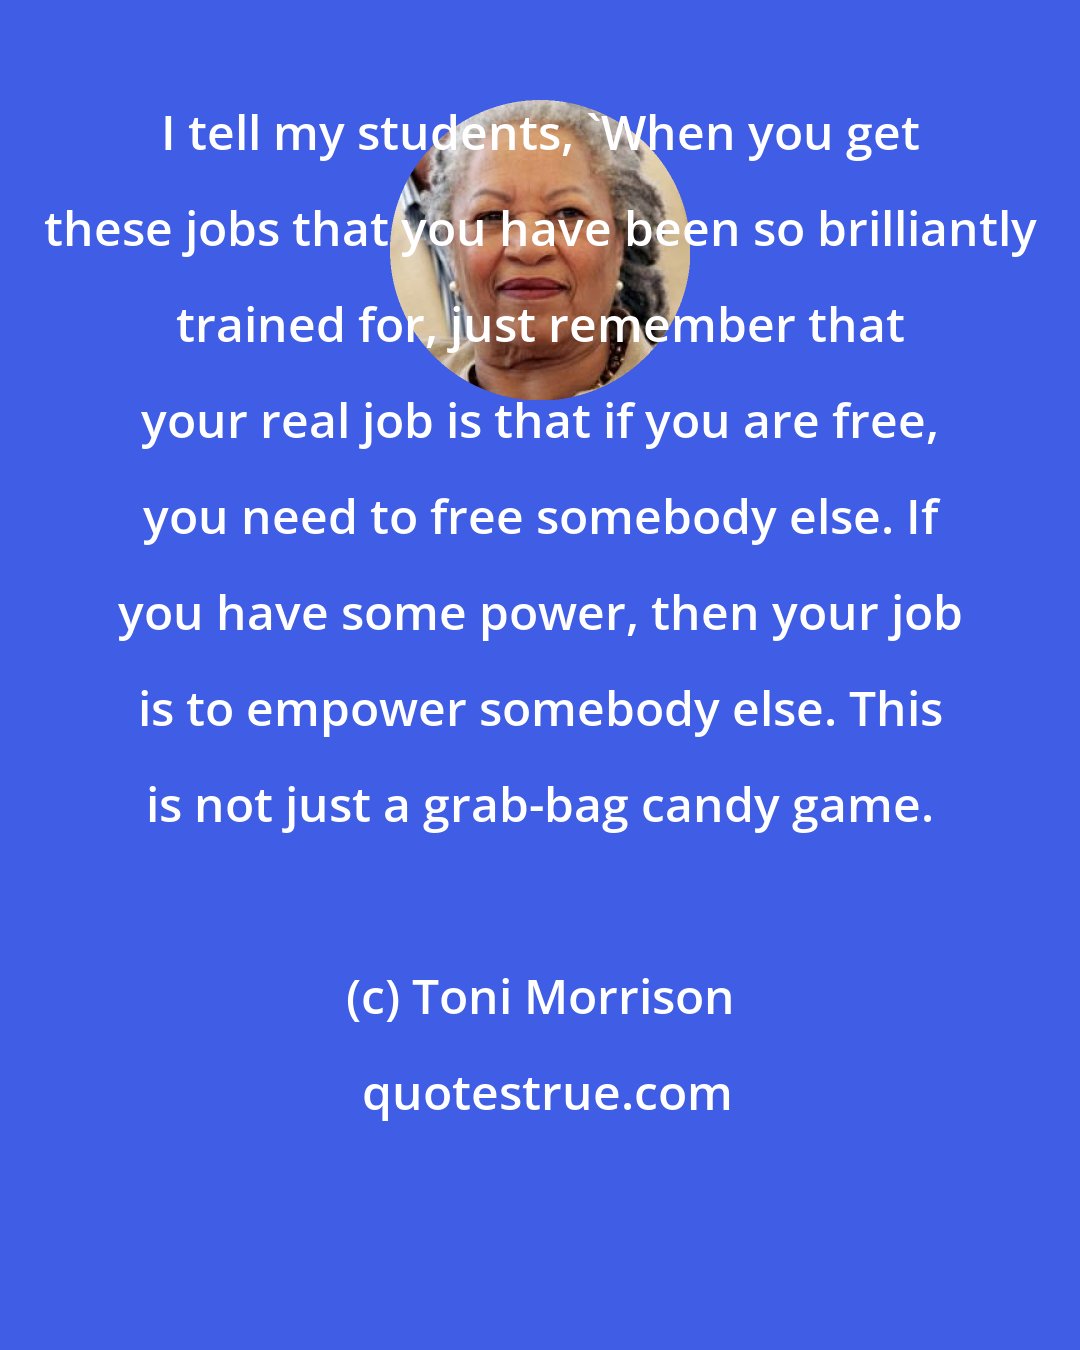 Toni Morrison: I tell my students, 'When you get these jobs that you have been so brilliantly trained for, just remember that your real job is that if you are free, you need to free somebody else. If you have some power, then your job is to empower somebody else. This is not just a grab-bag candy game.